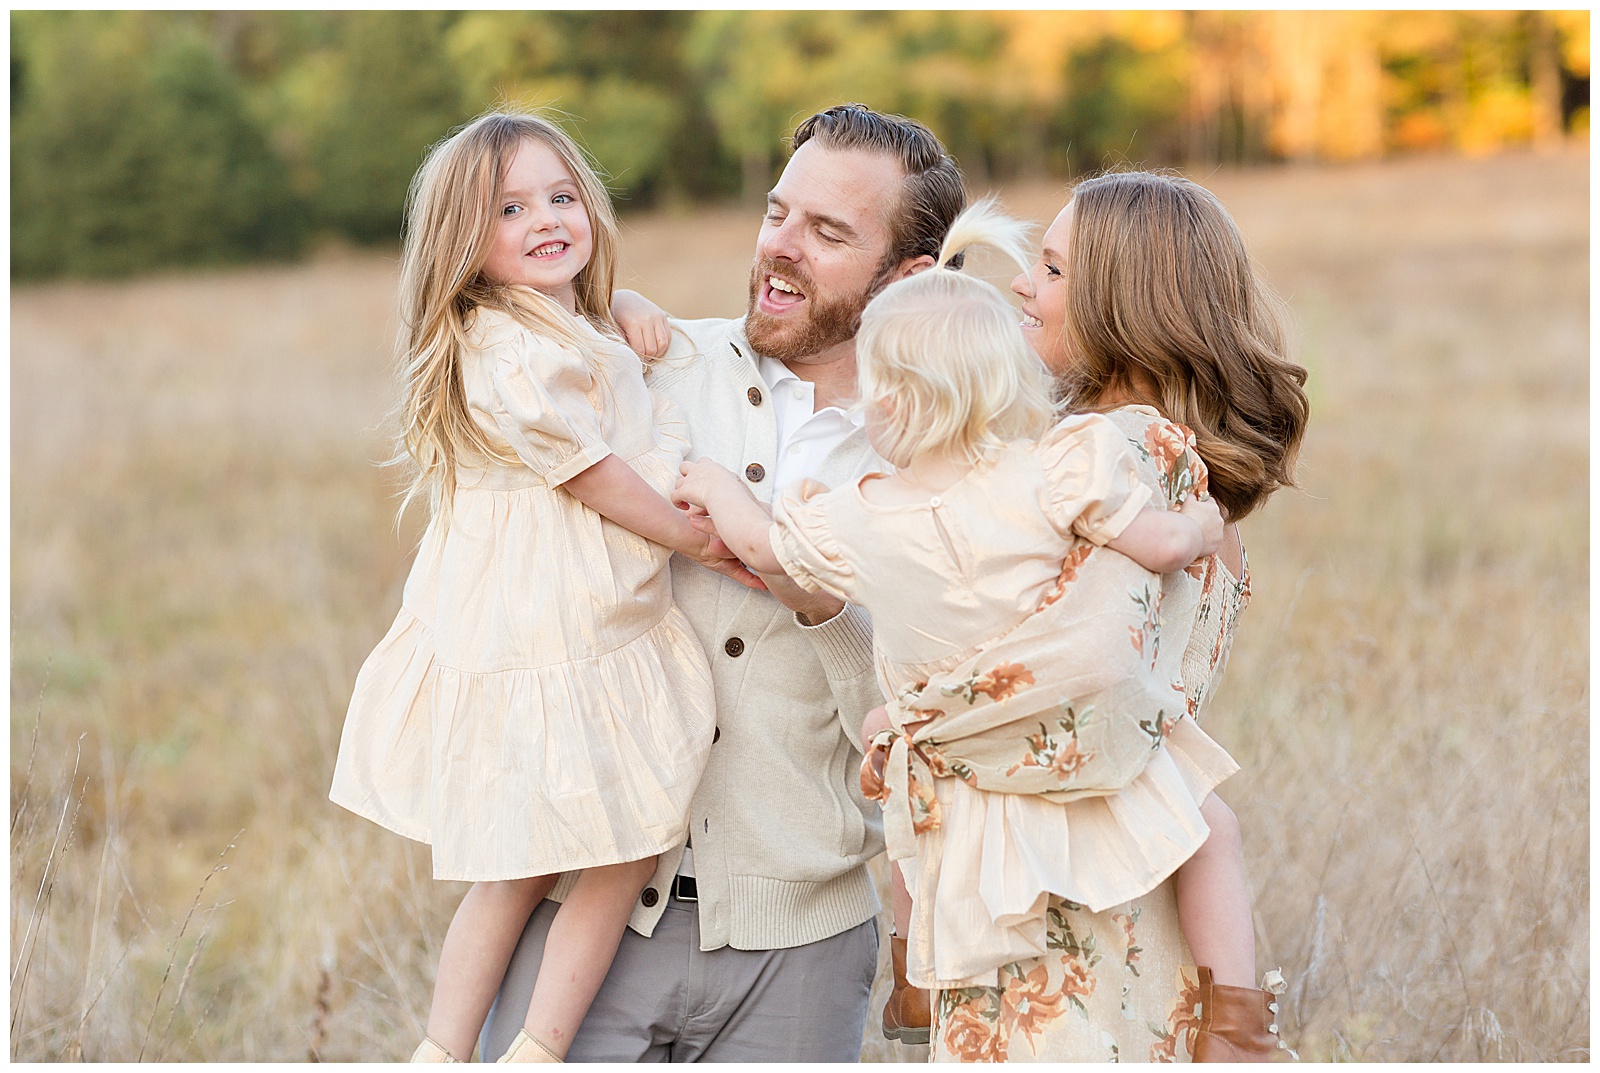 Mom and Dad hold their two young daughters as they laugh and tickle each other in a field in Nashville wearing coordinating yellow/cream colors.